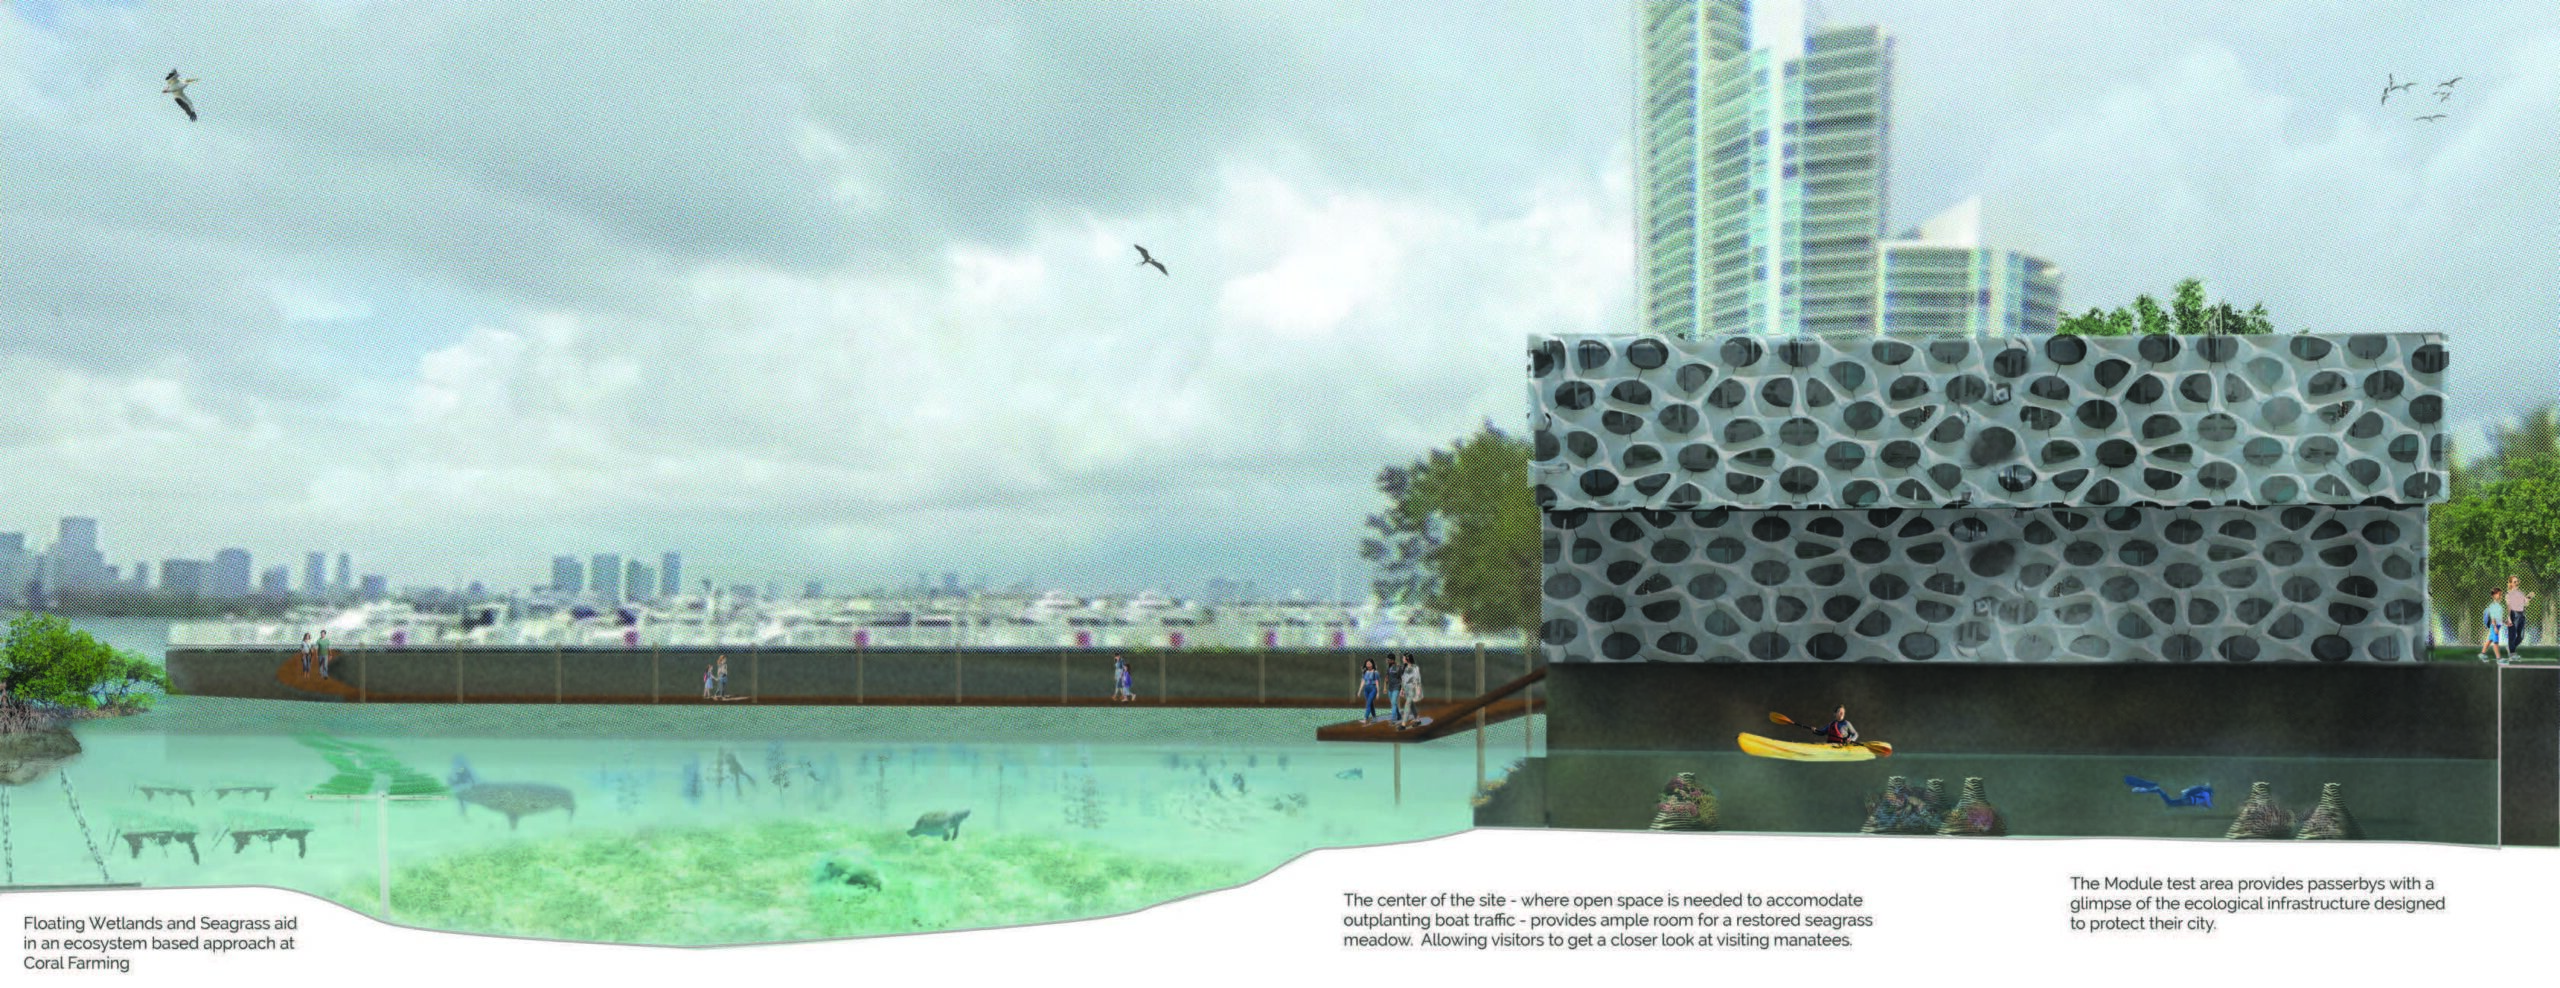 Design with Diploria: Coral Infrastructure for a New Coastal Future